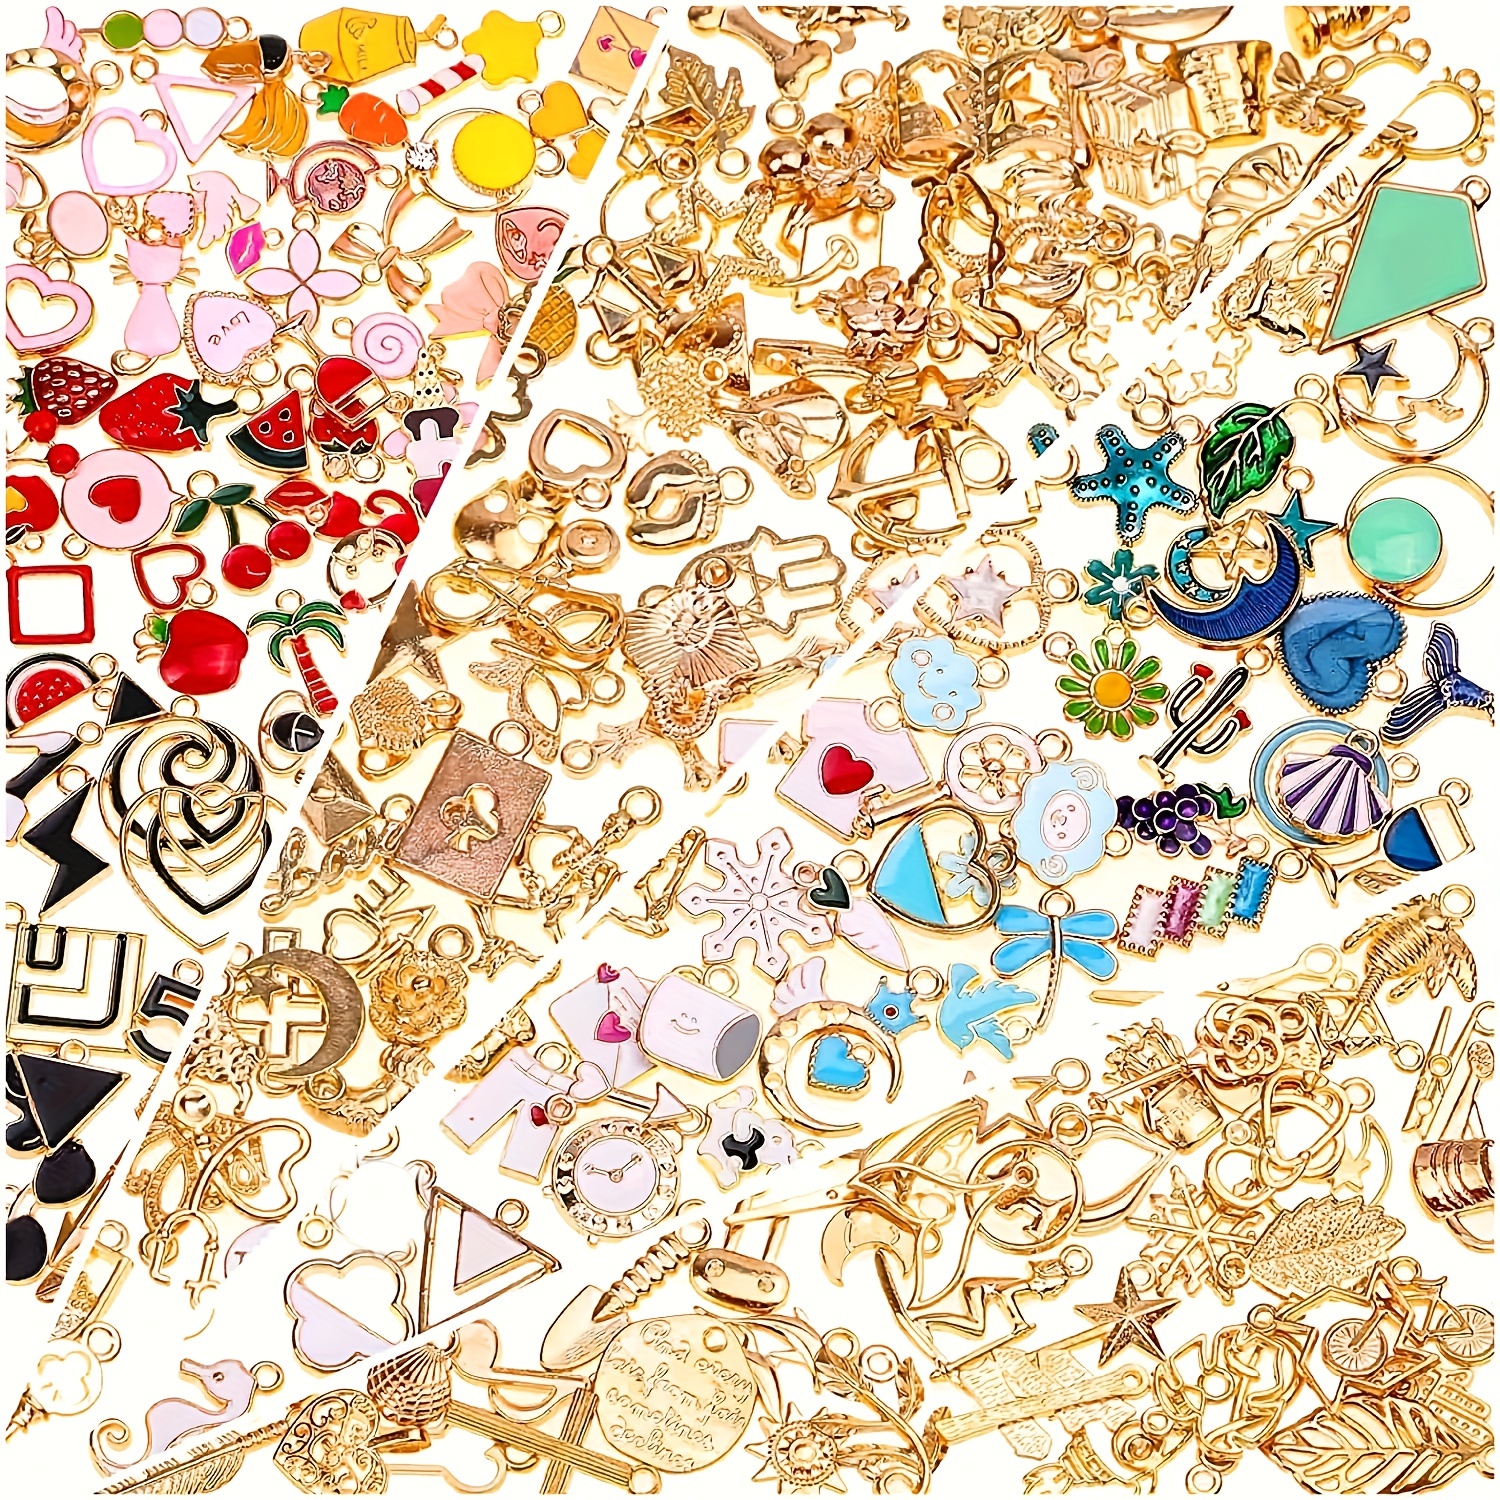 

20/60 Pcs Bracelet Charms For Jewelry Making Wholesale Bulk Lots Jewelry Making Silvery Bracelet Charms Golden Plated Enamel Charms Pendants For Necklace Bracelet Jewelry Making And Craft